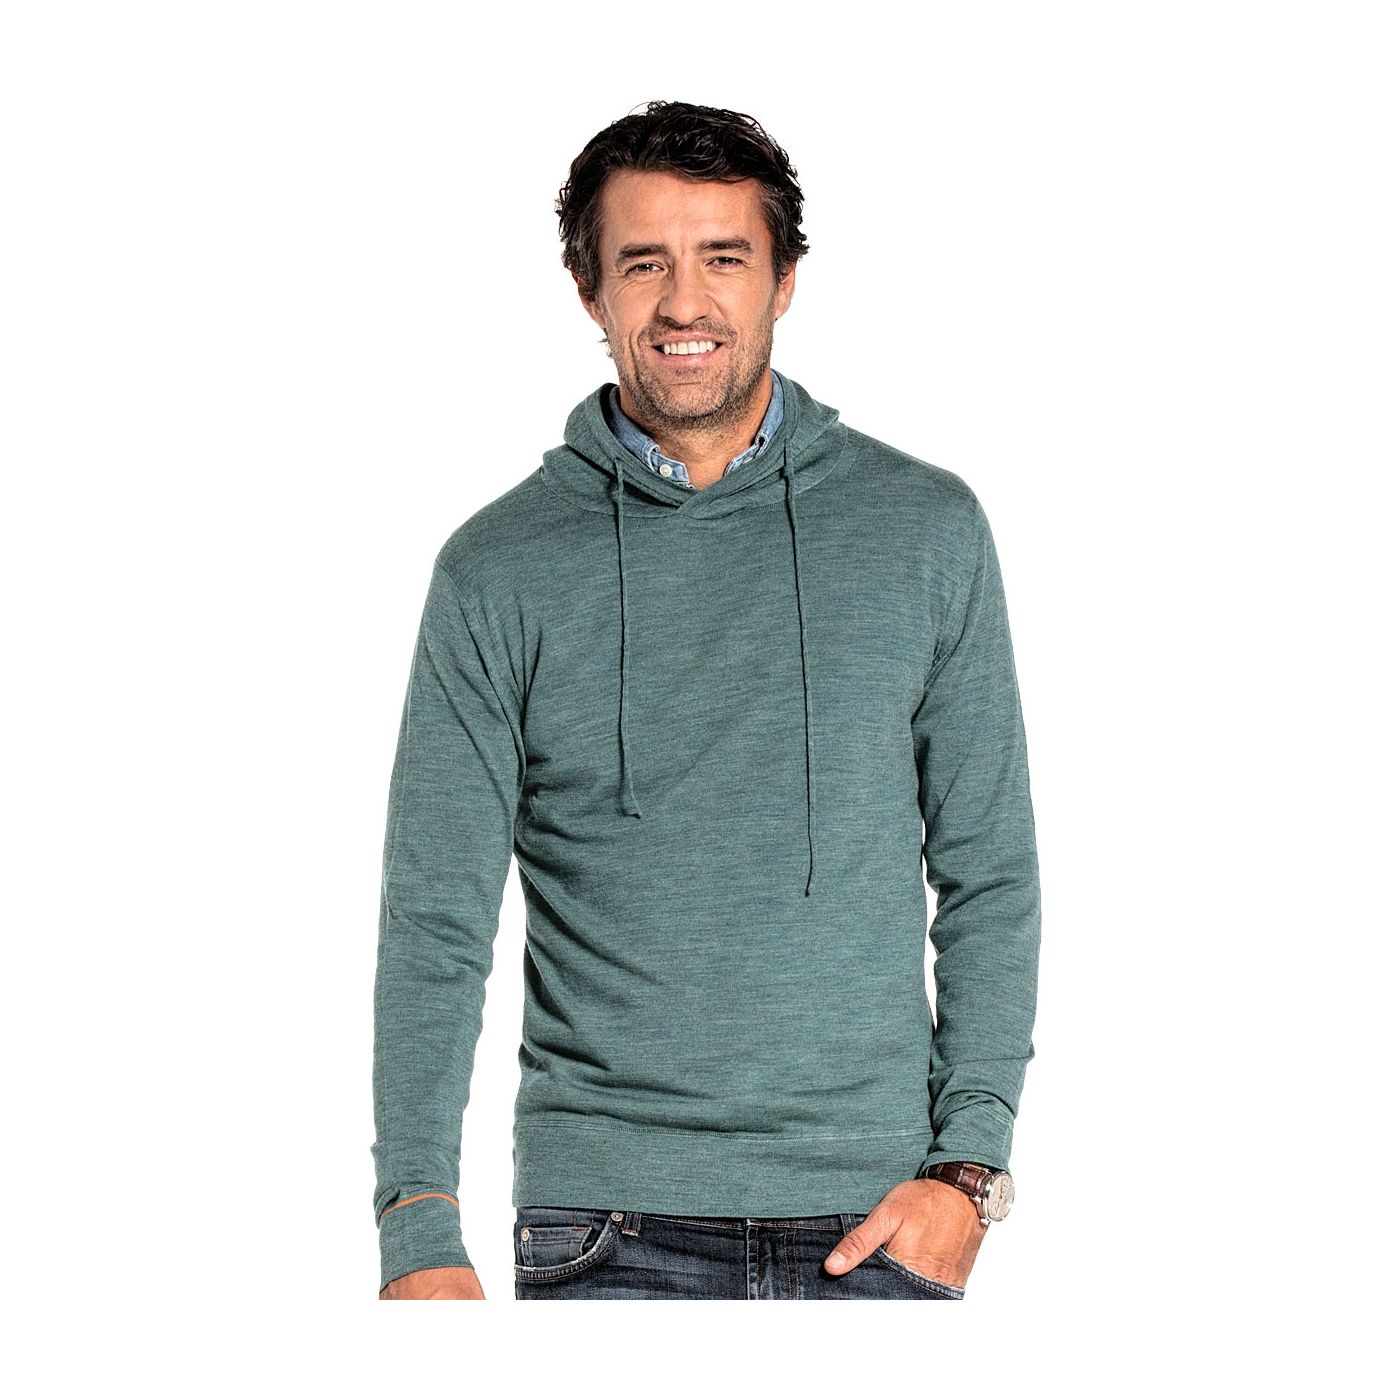 Sweater with hoodie for men made of Merino wool in Light green